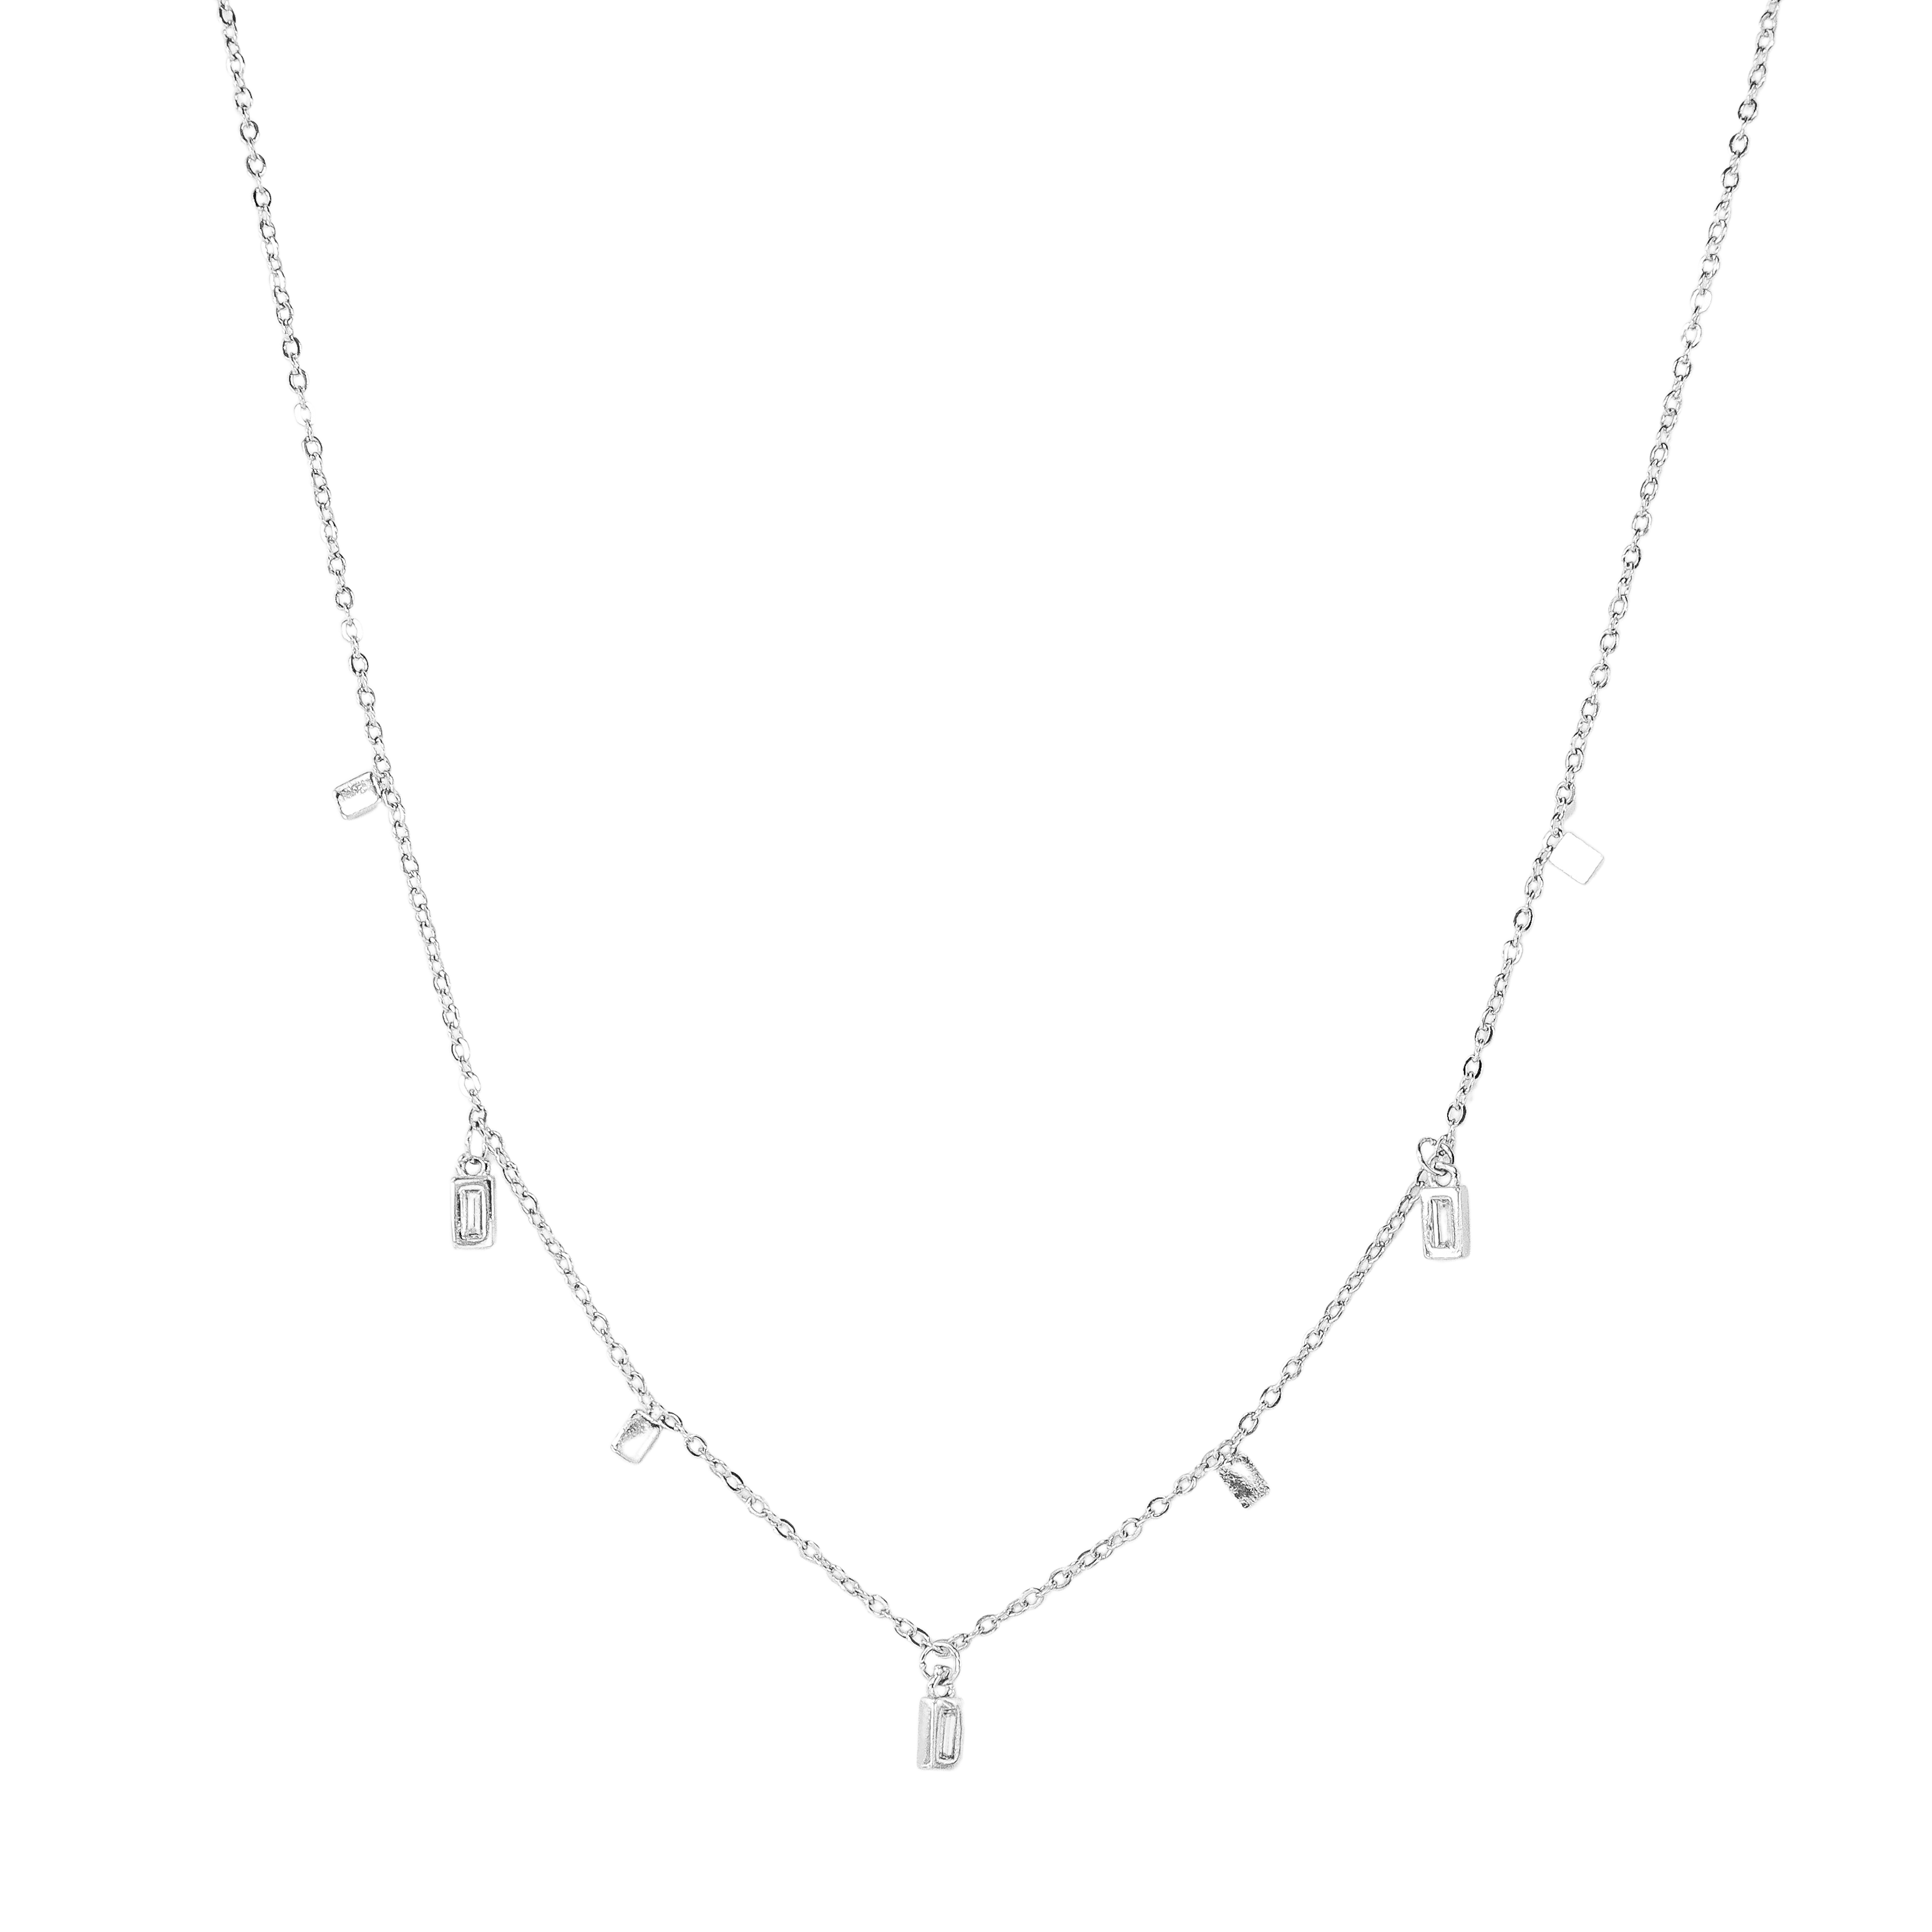 Silver Crystal Baguette Charm Necklace